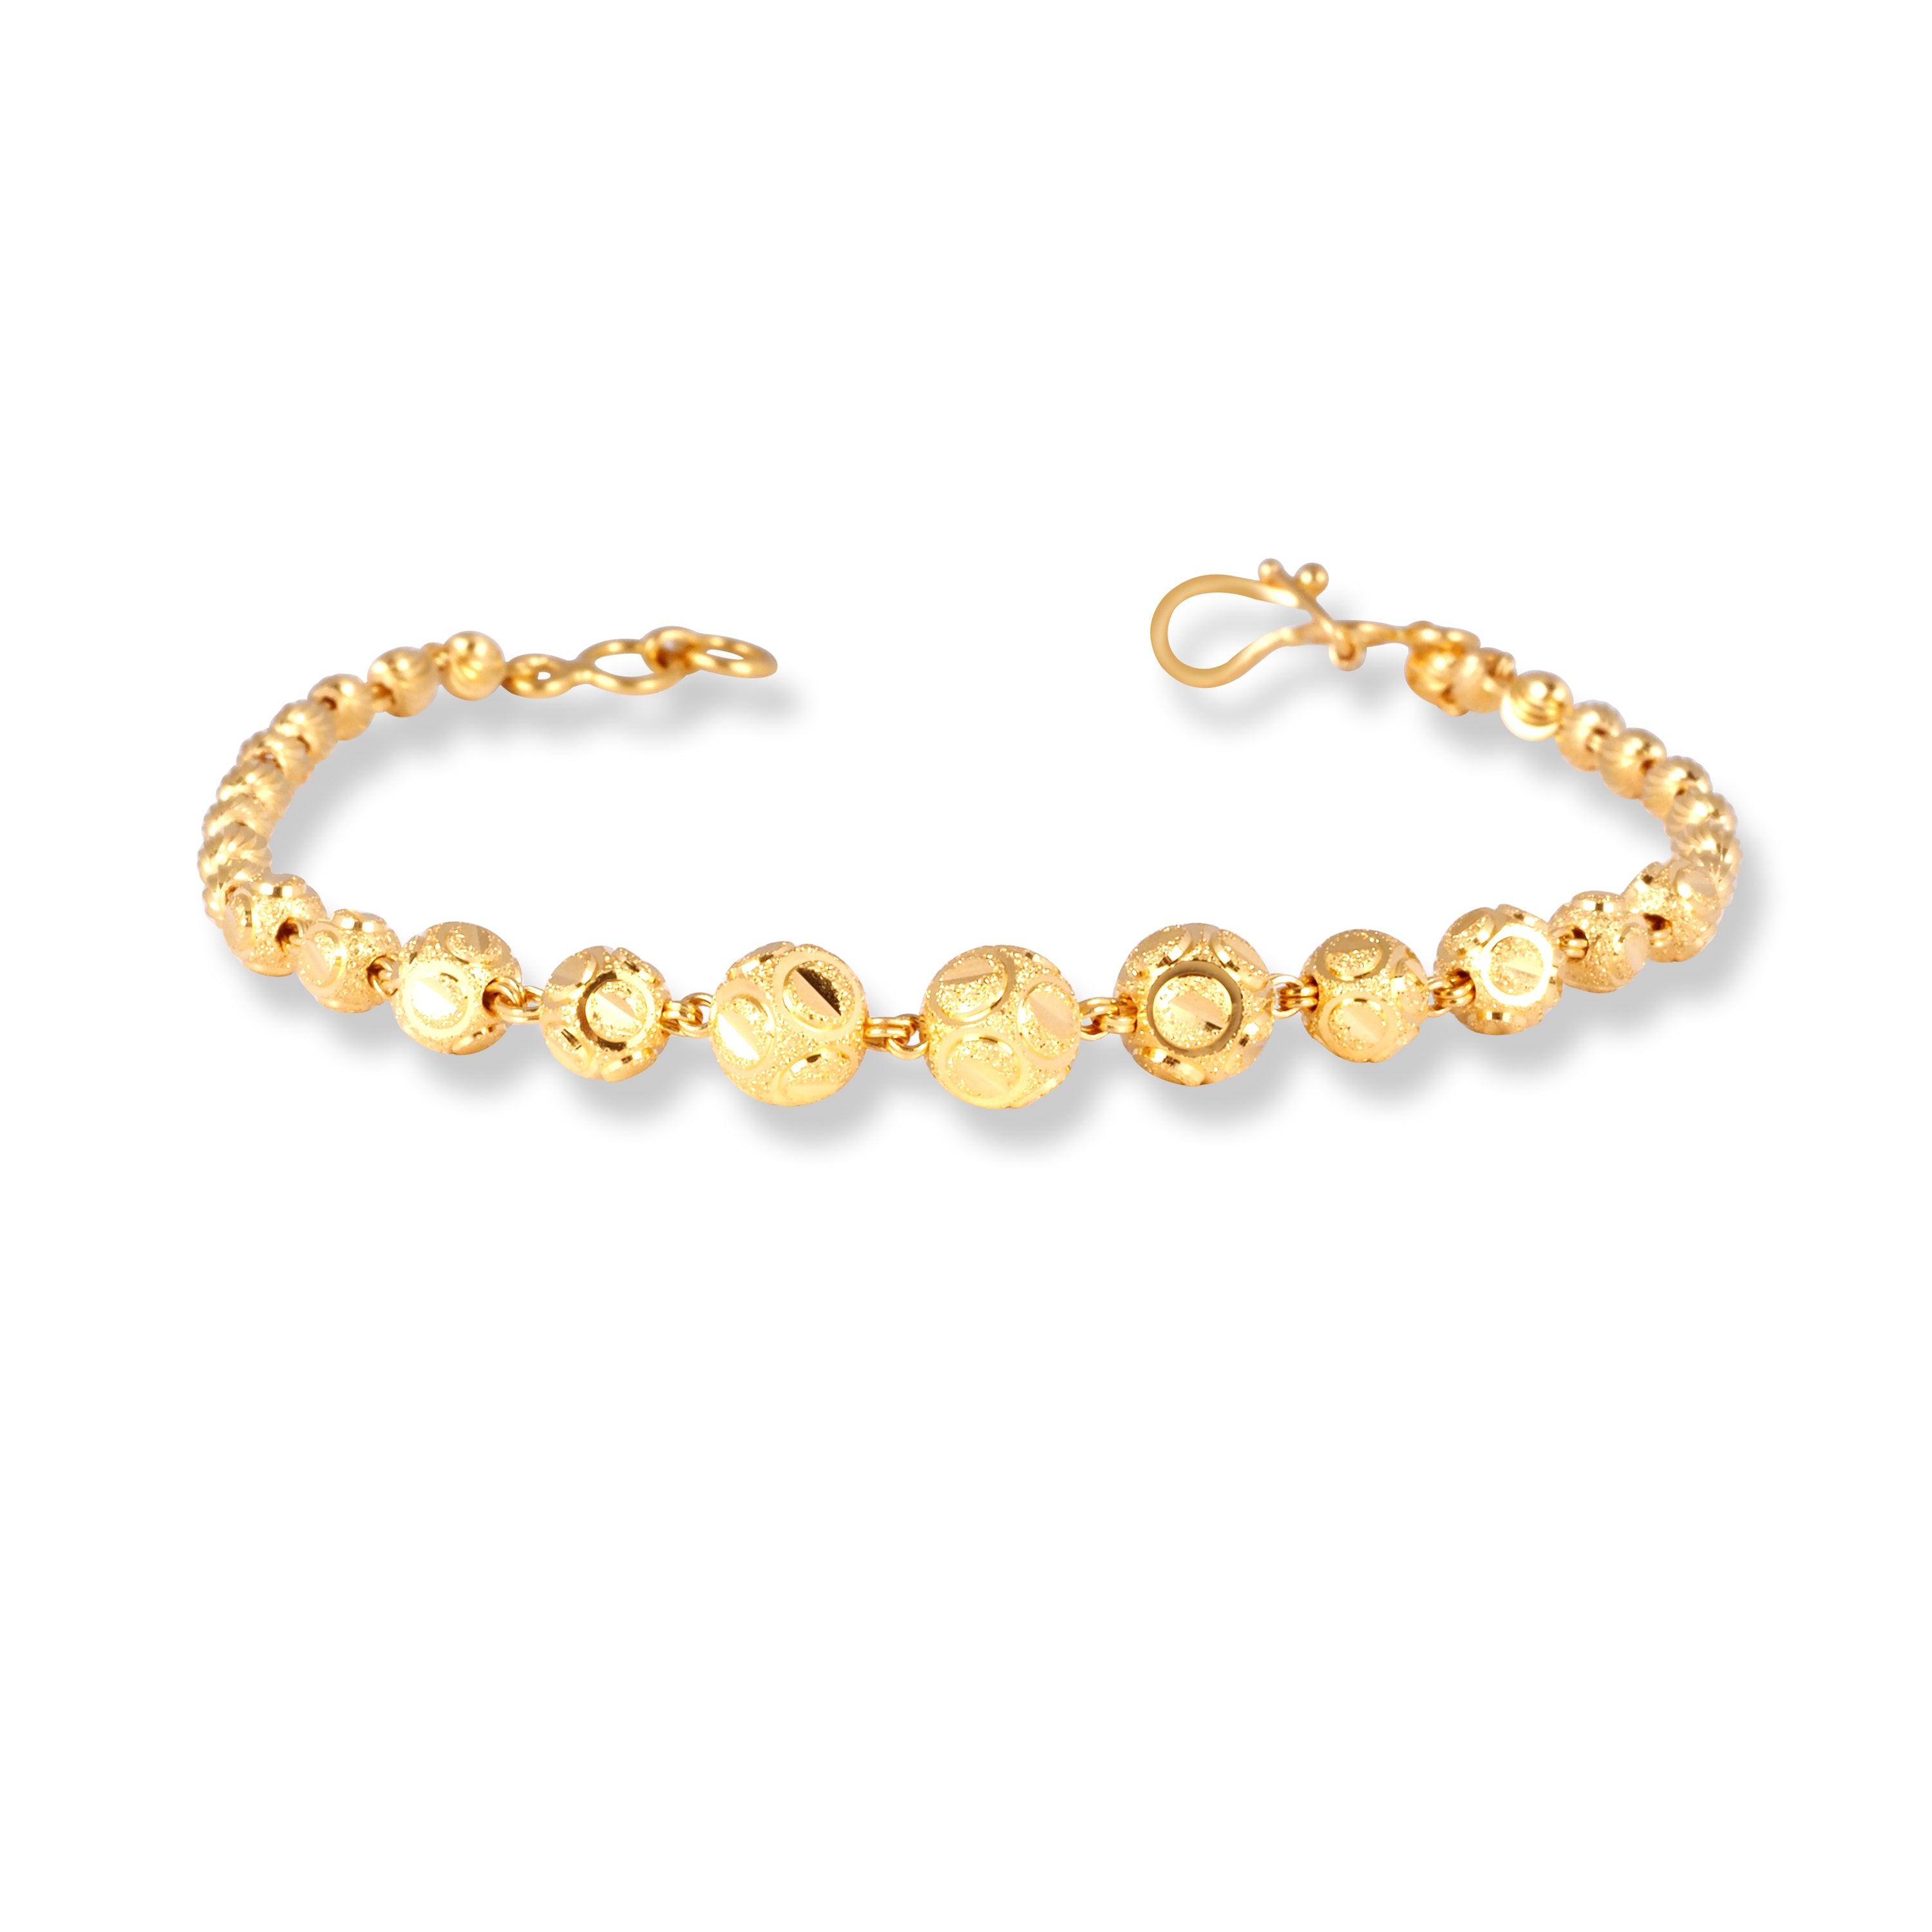 22ct Gold Ladies Beaded Bracelet with Hook Clasp LBR-7151 - Minar Jewellers